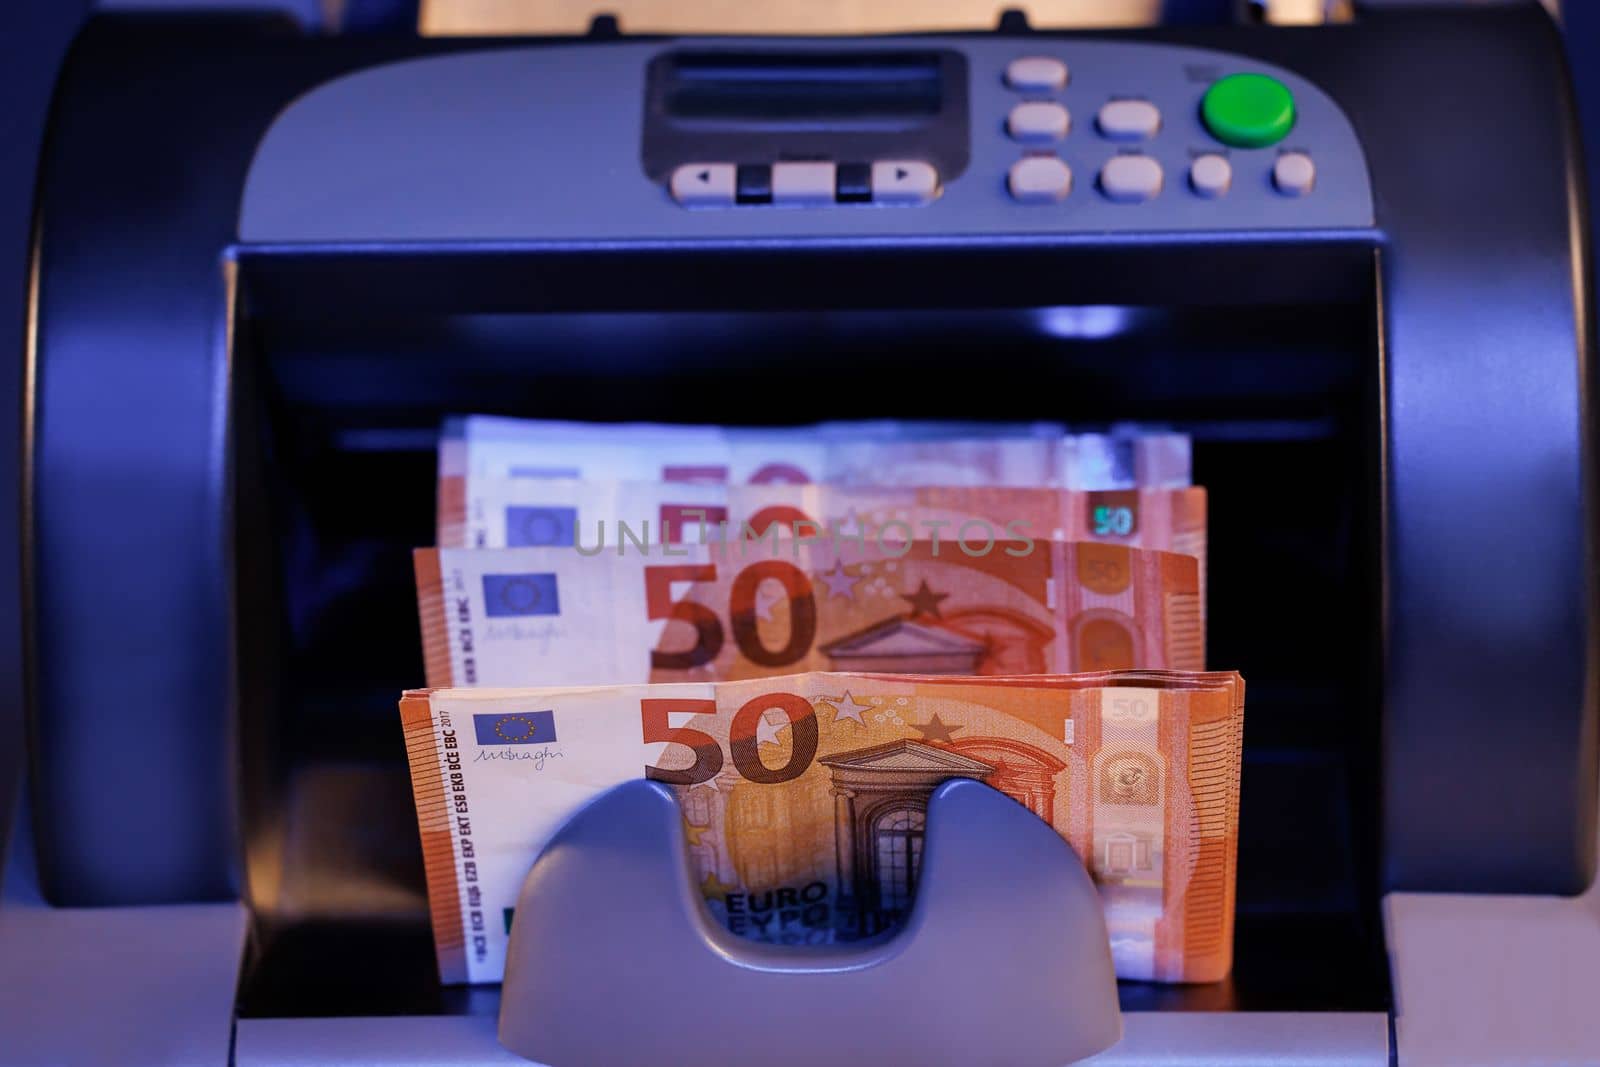 Counting mechanism is processing euros. 50 euro banknotes counting in the machine. Euro currency on counting machine by uflypro